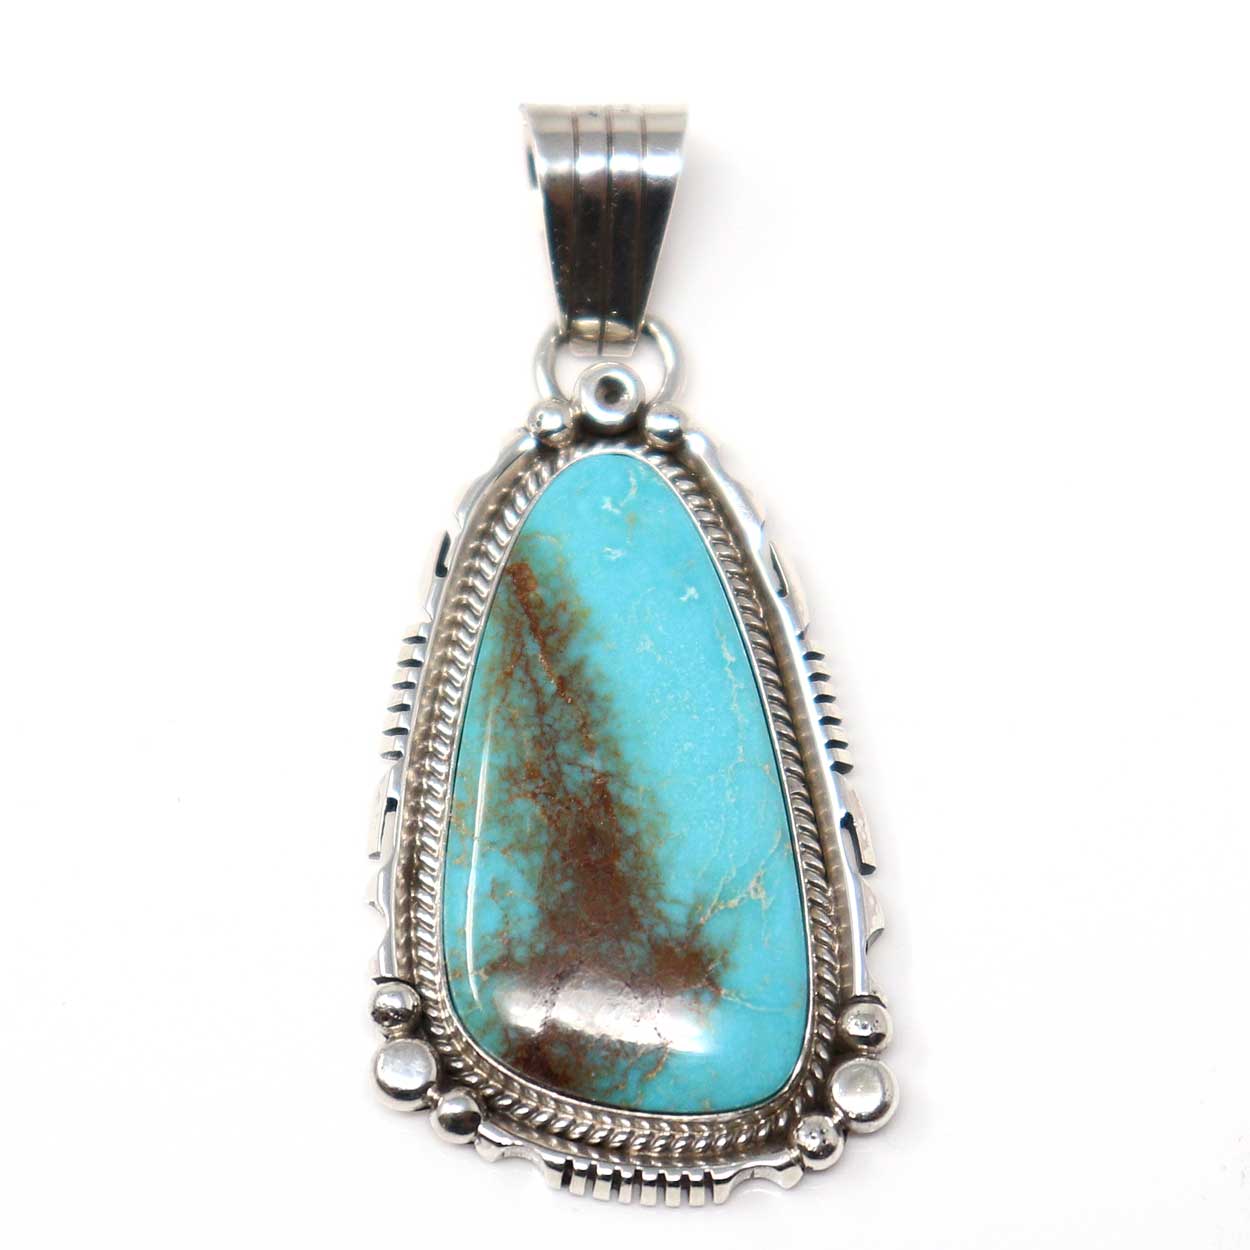 Turquoise & Silver Pendant by Yellowhair